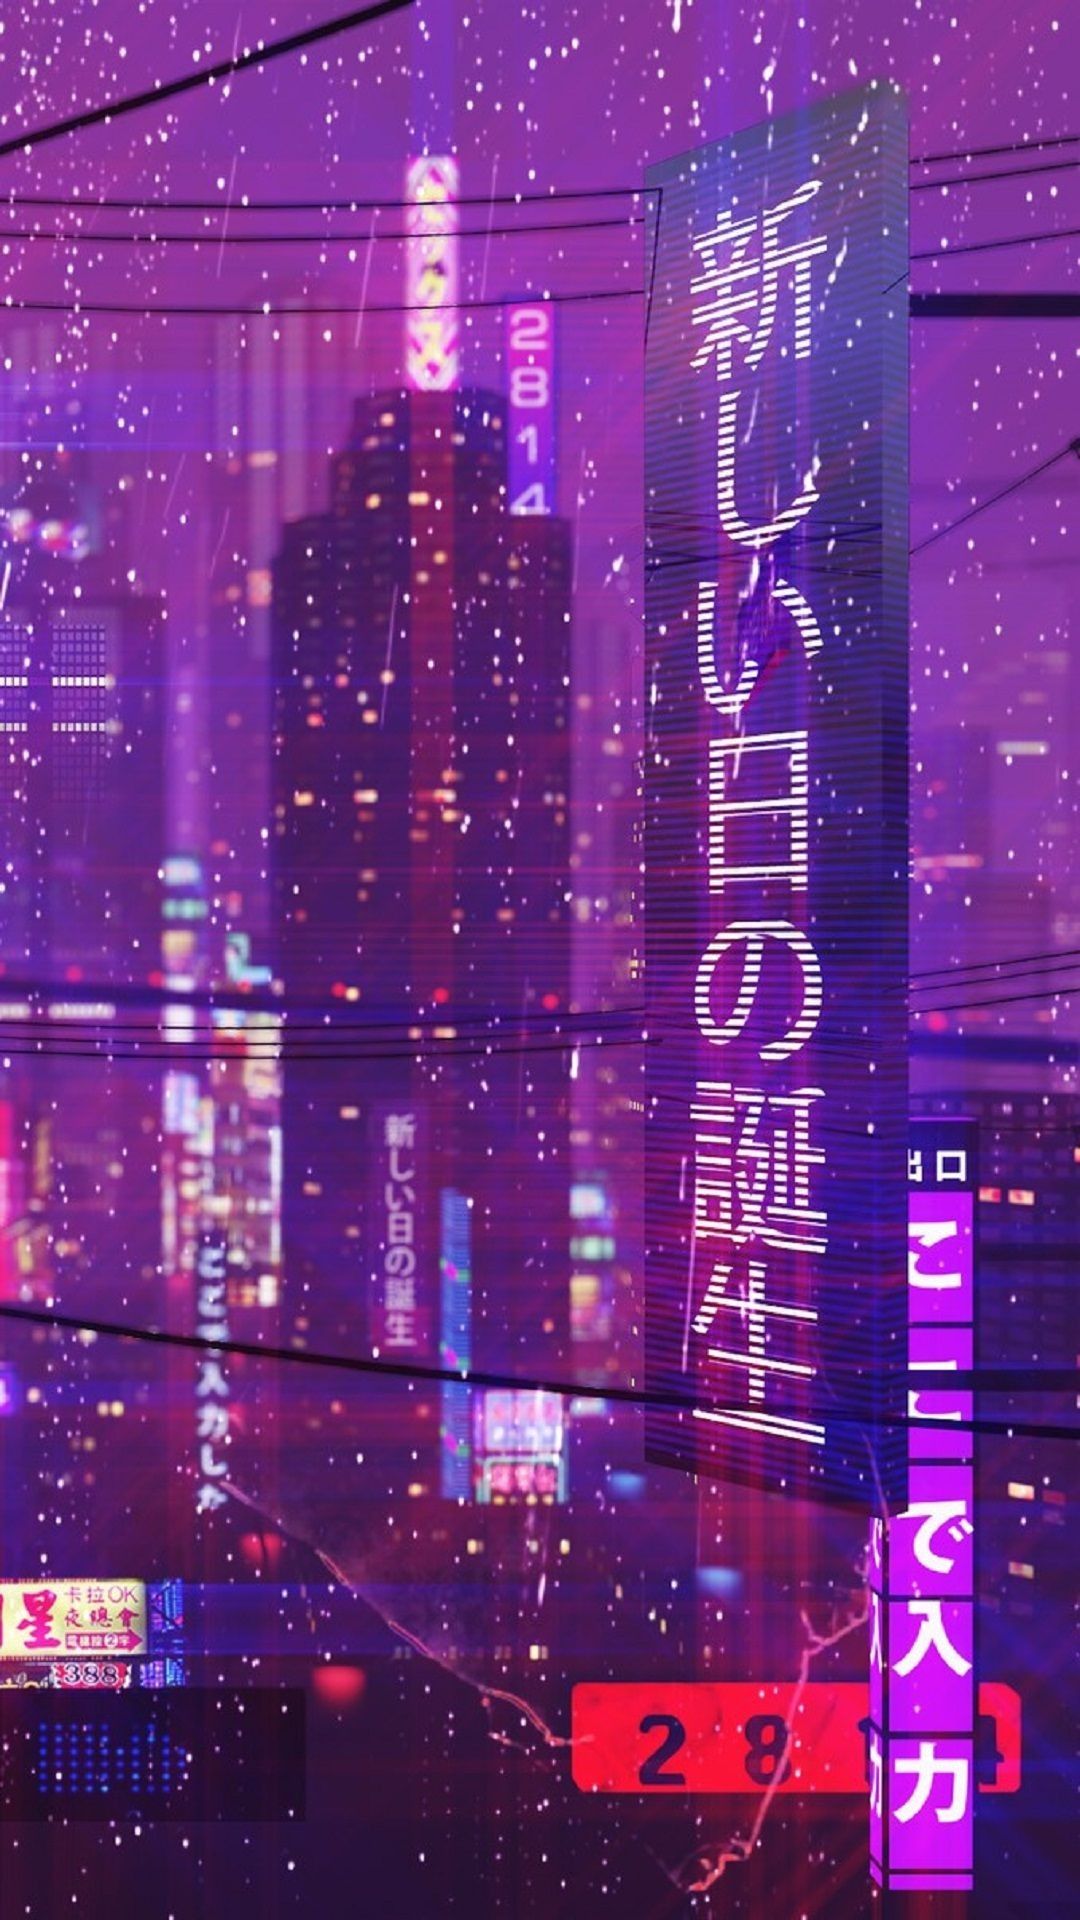 Cyberpunk City Night Time HD Live Wallpaper Best Of the Most Awesome Image On the Internet O. Dark purple aesthetic, Violet aesthetic, Purple aesthetic